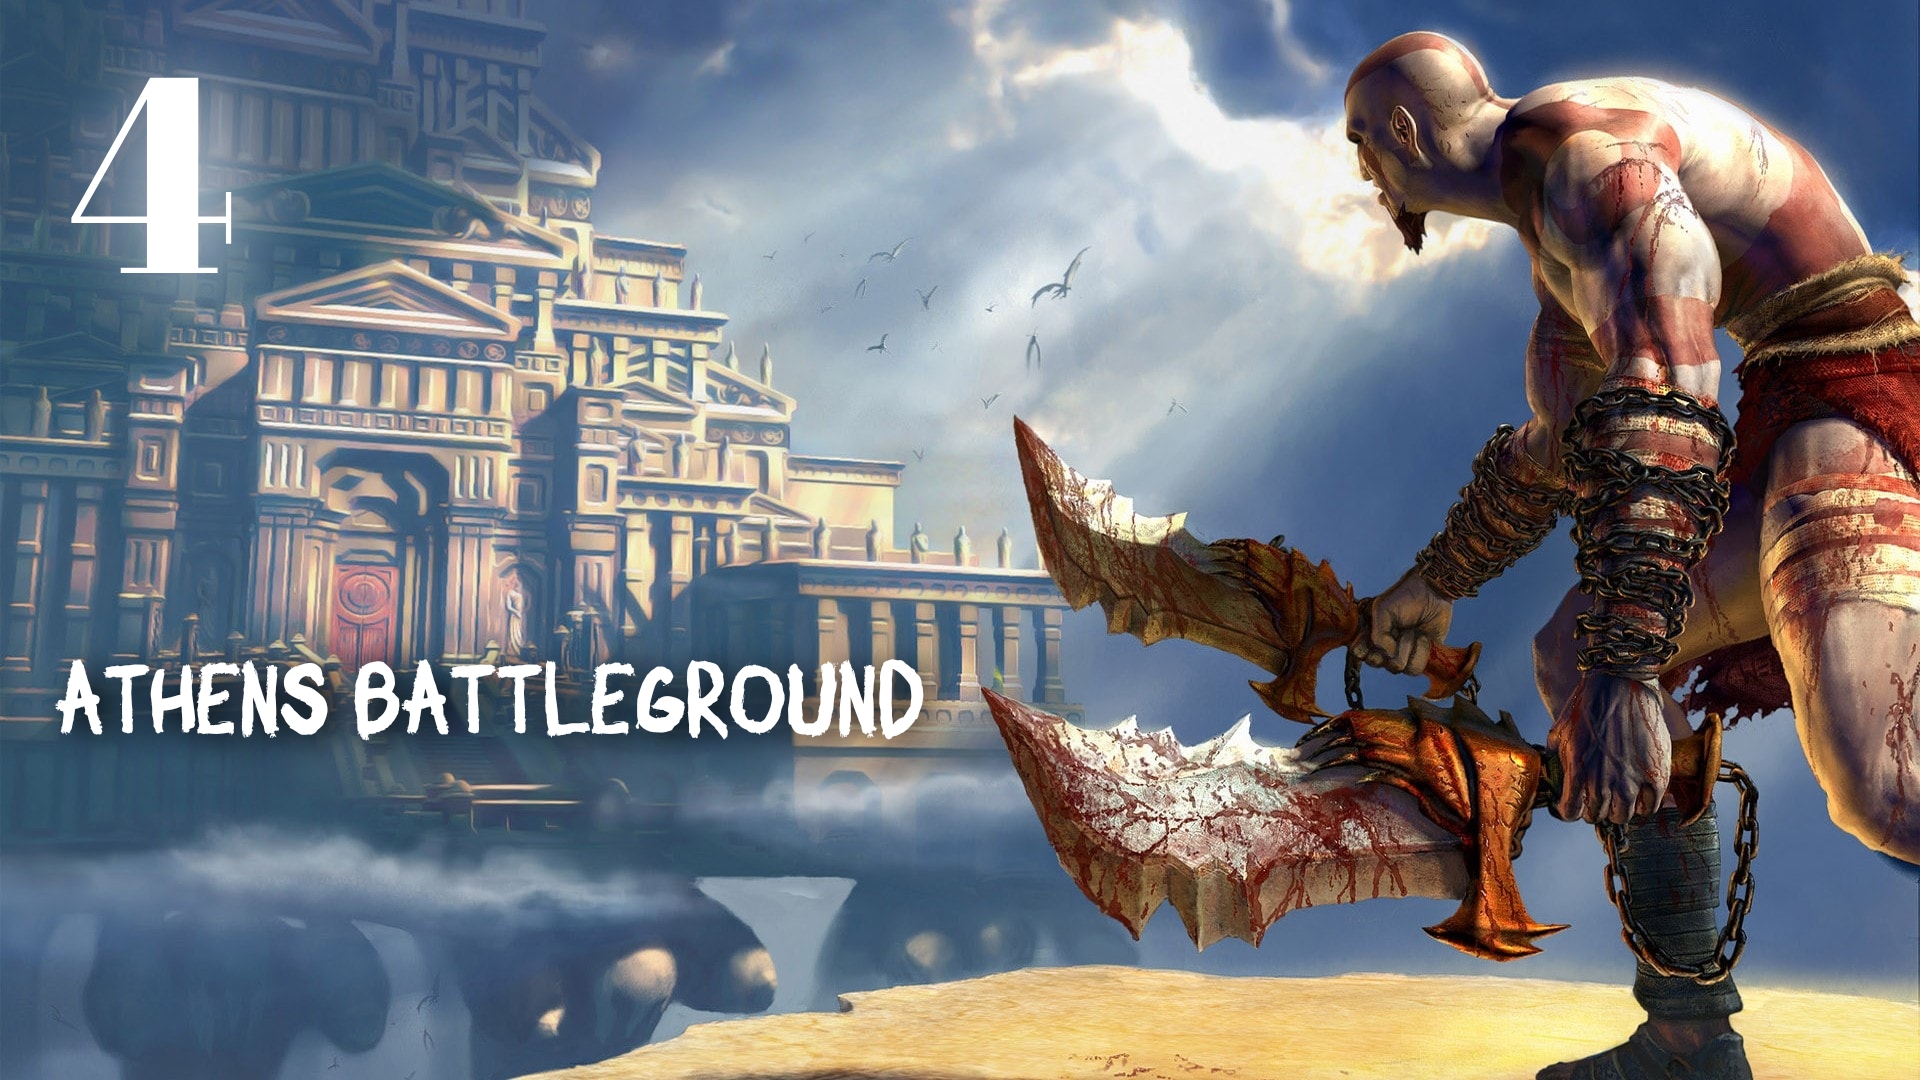 God of War HD The Road to Athens: Athens Battleground